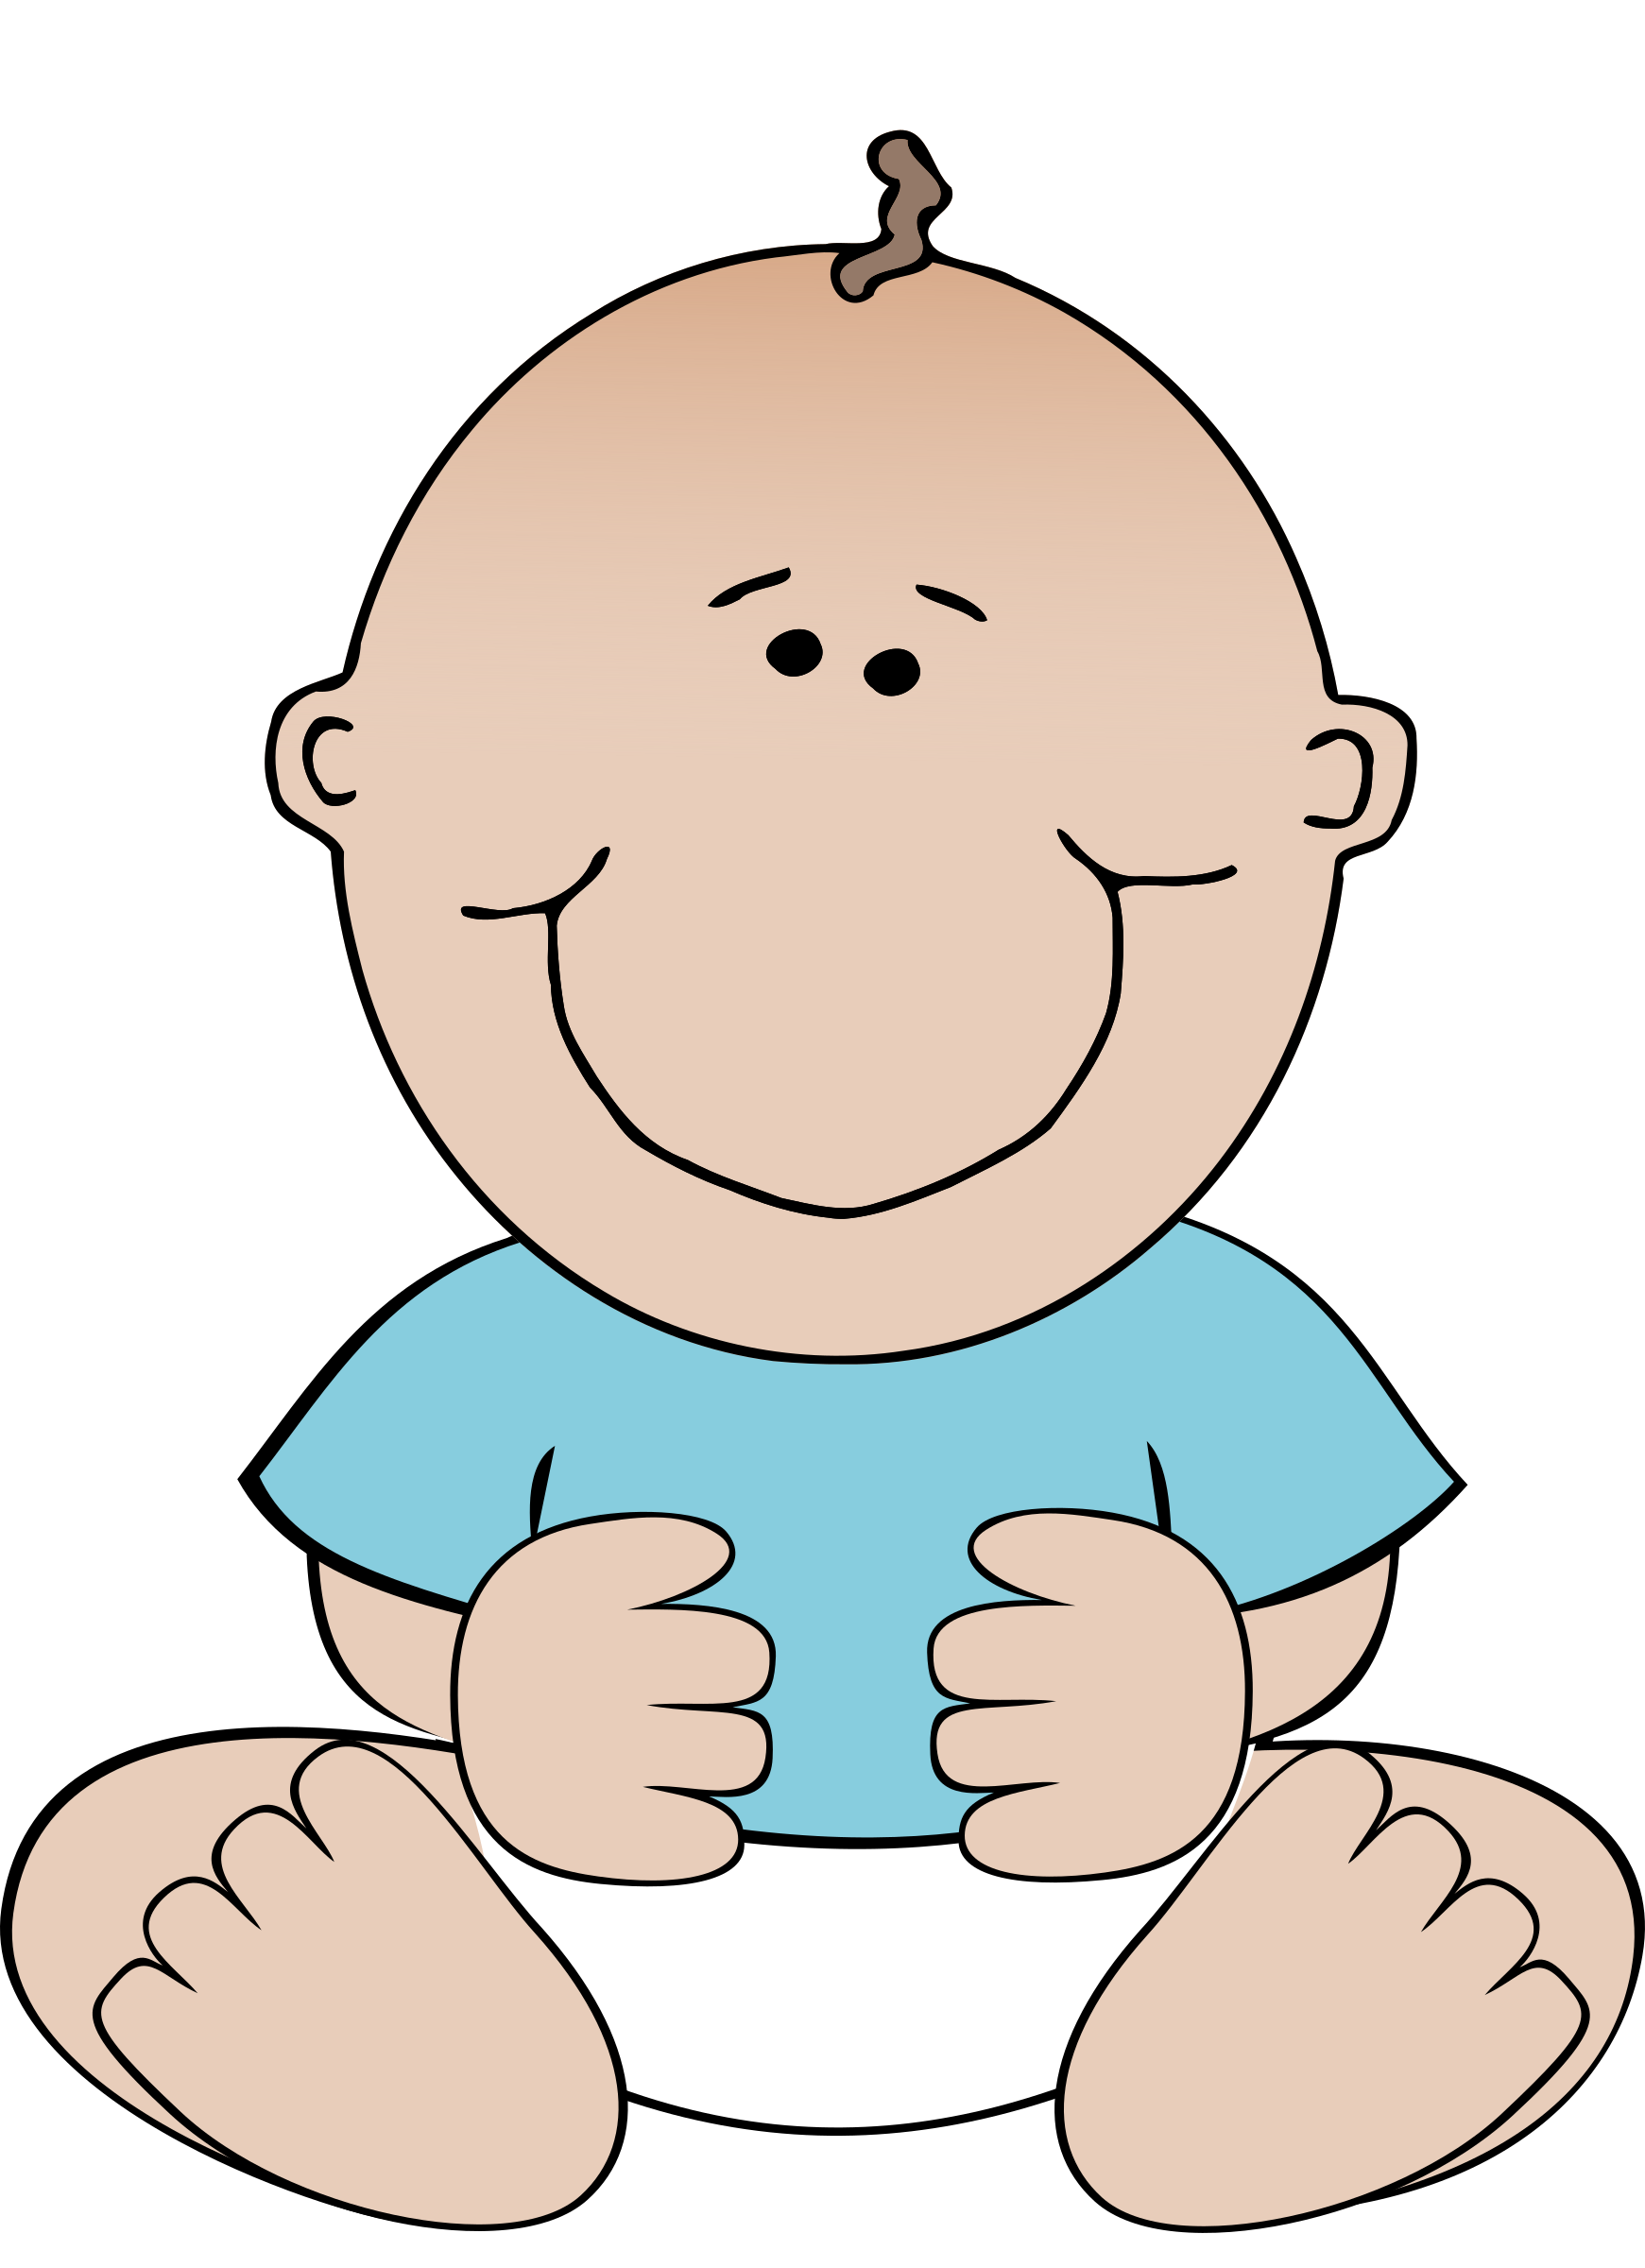 Baby Boy Sitting Vector Clipart image - Free stock photo - Public ...